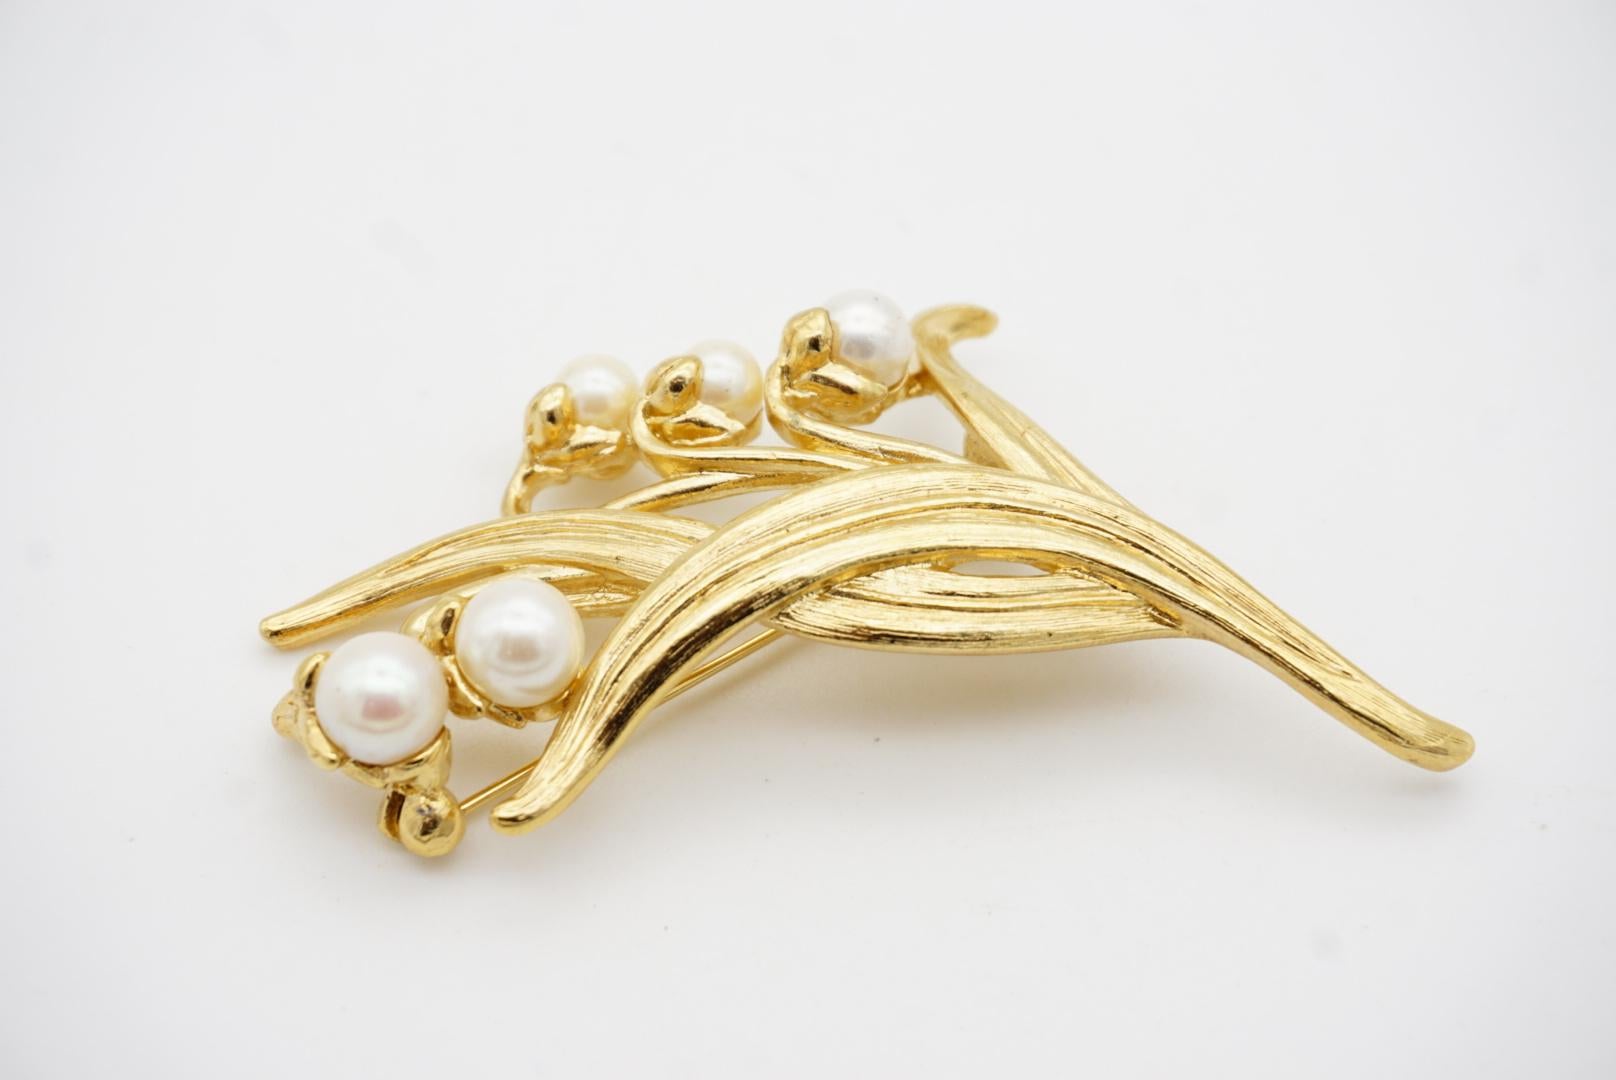 Givenchy Vintage 1980s Large Lily Of The Valley White Bell Flower Leaf Brooch For Sale 4